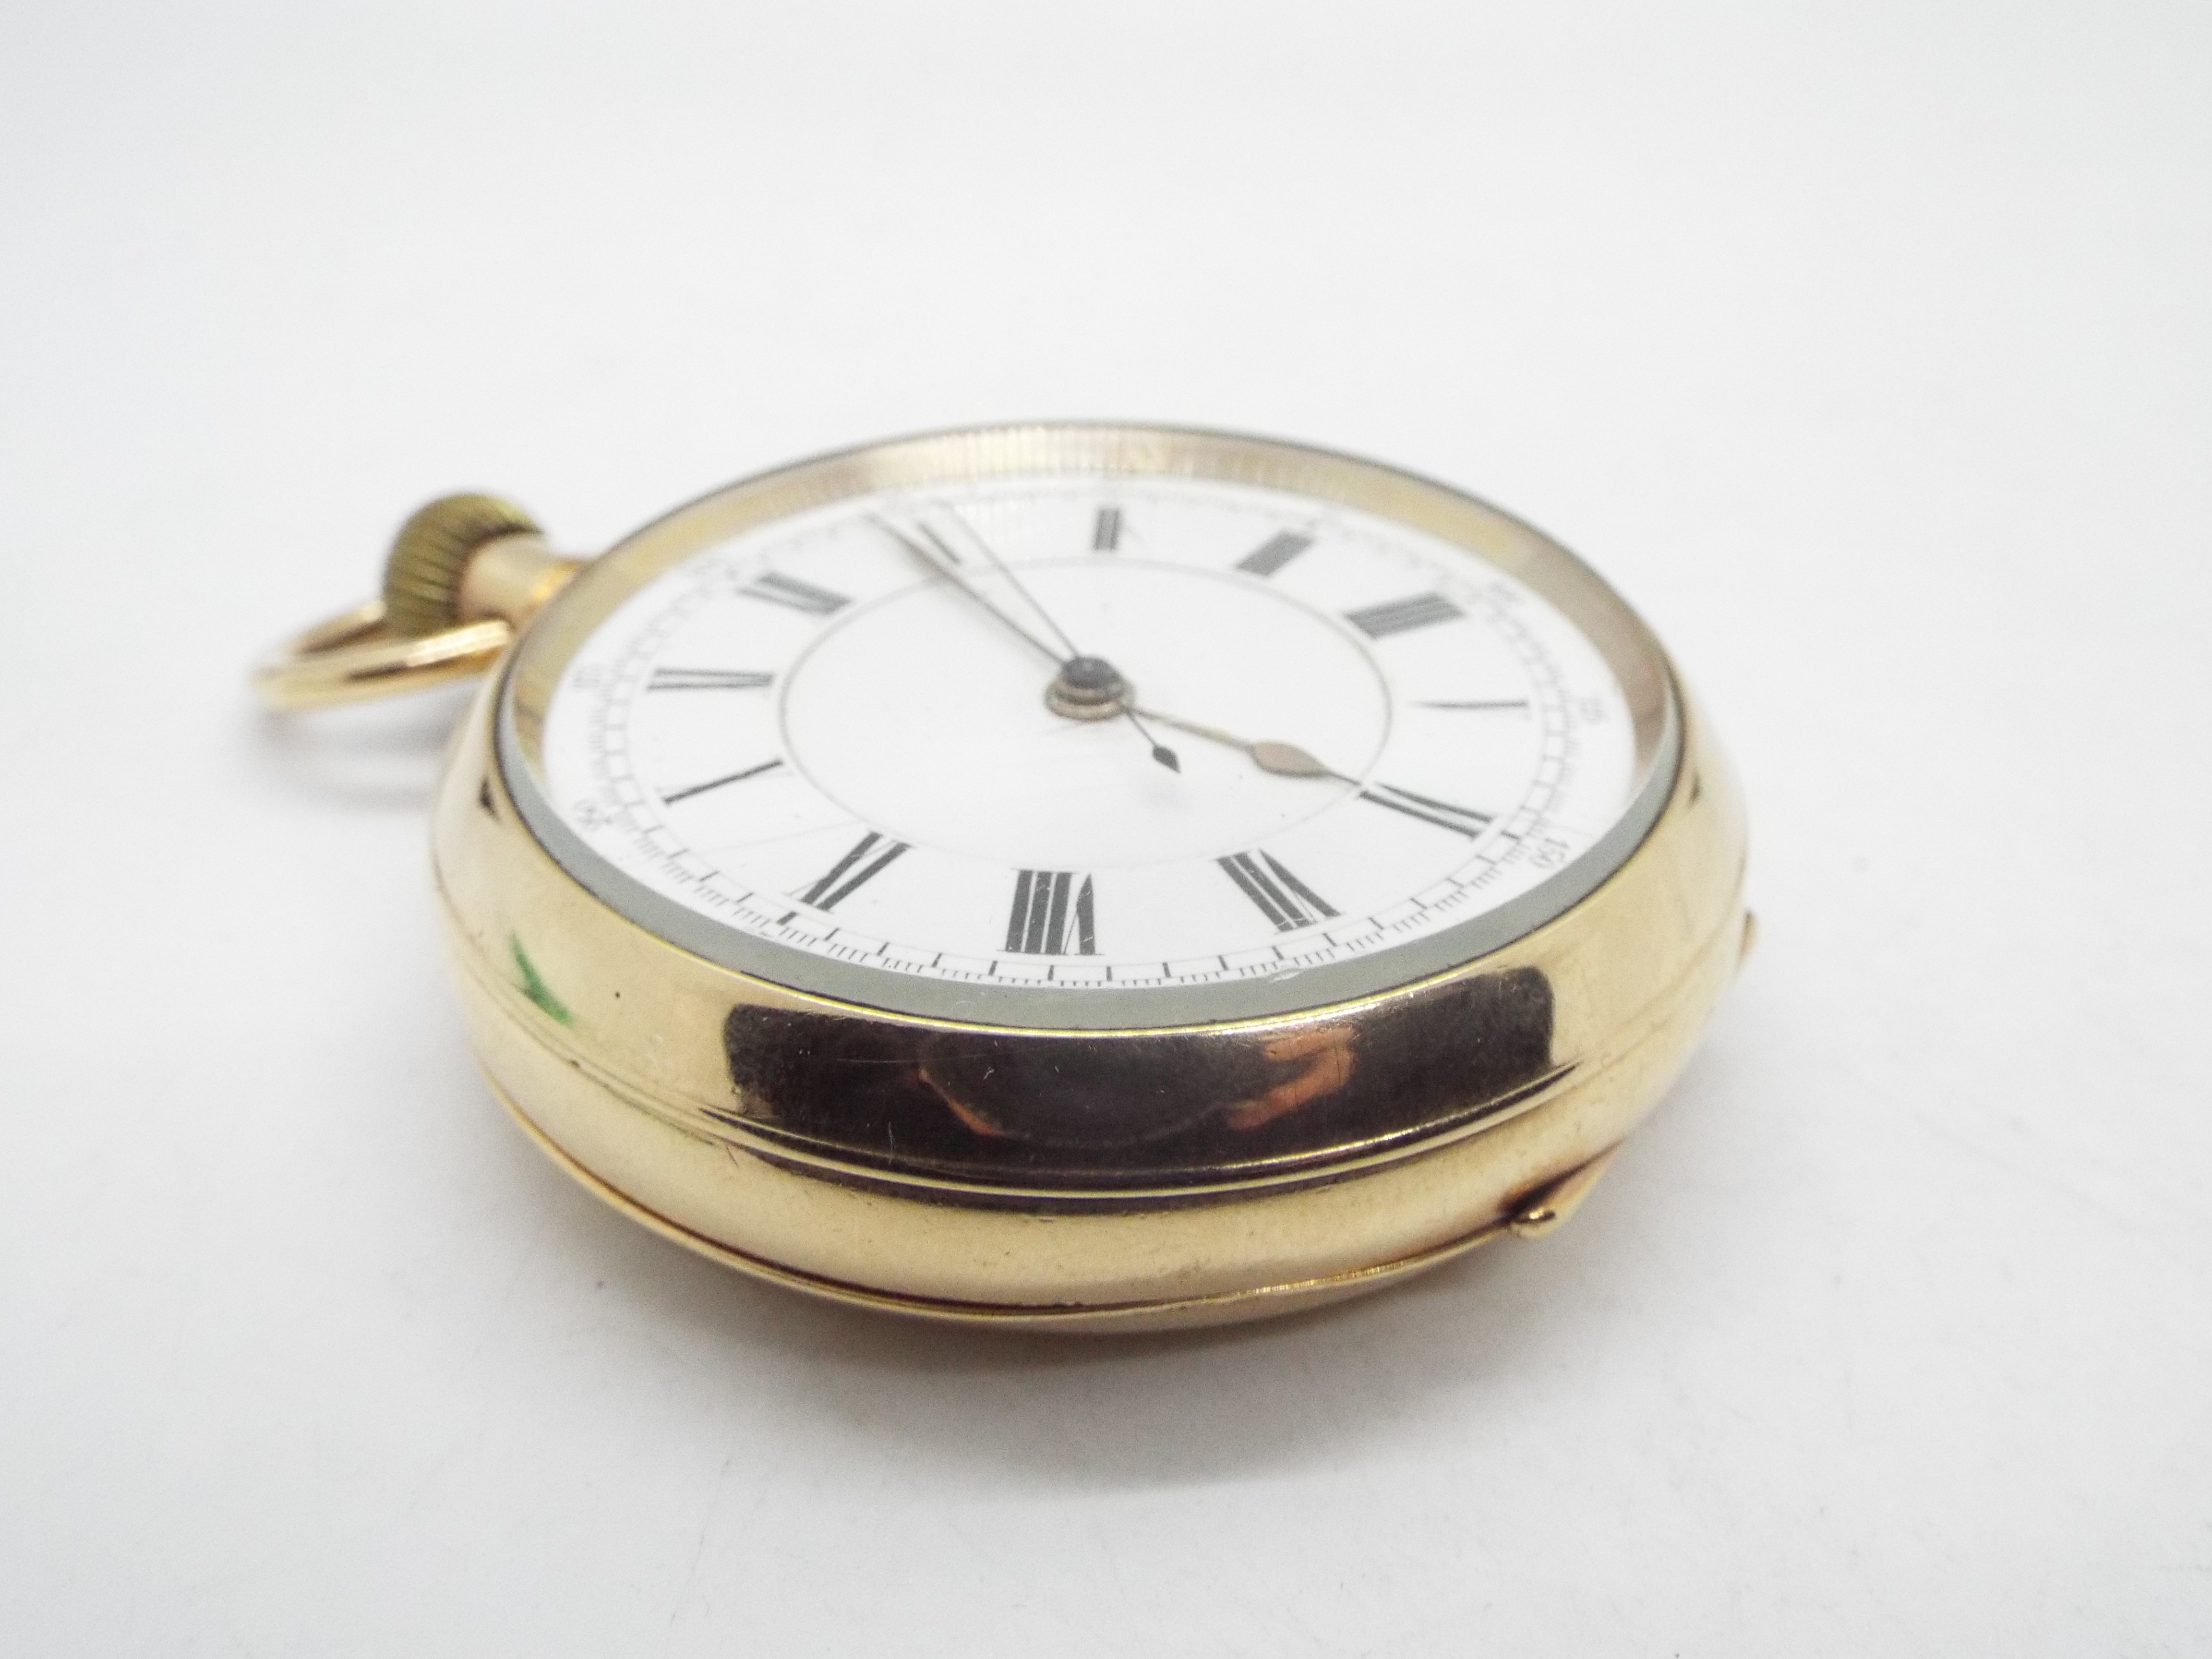 18K - A yellow metal cased pocket watch, the case interior stamped 18K, - Image 3 of 5